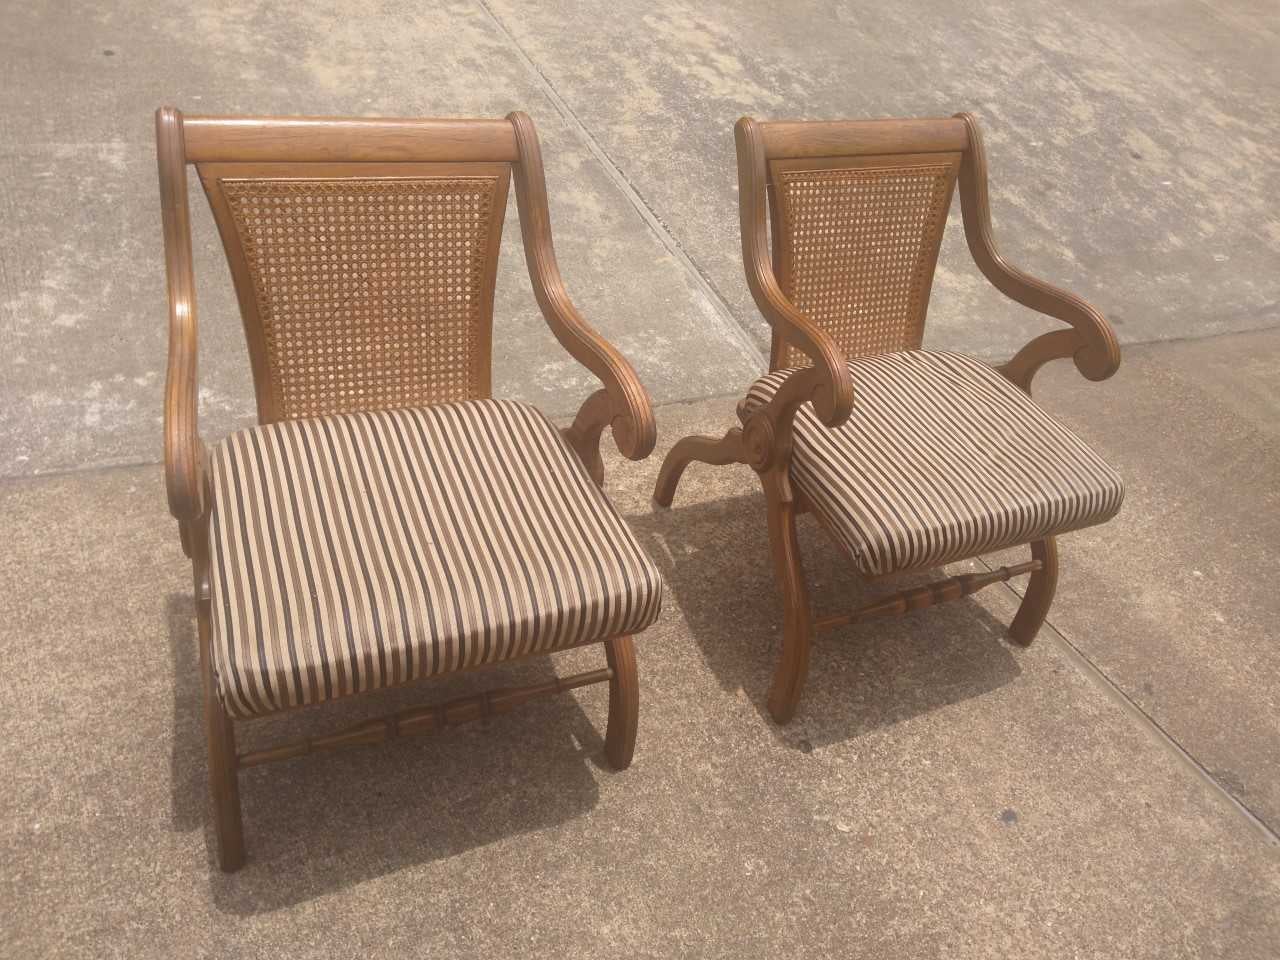 Curule chairs were originally designed and reserved in ancient Rome for the use of the highest government dignitaries and usually made like a campstool with curved legs. The design has evolved over the centuries and is used in many contemporary